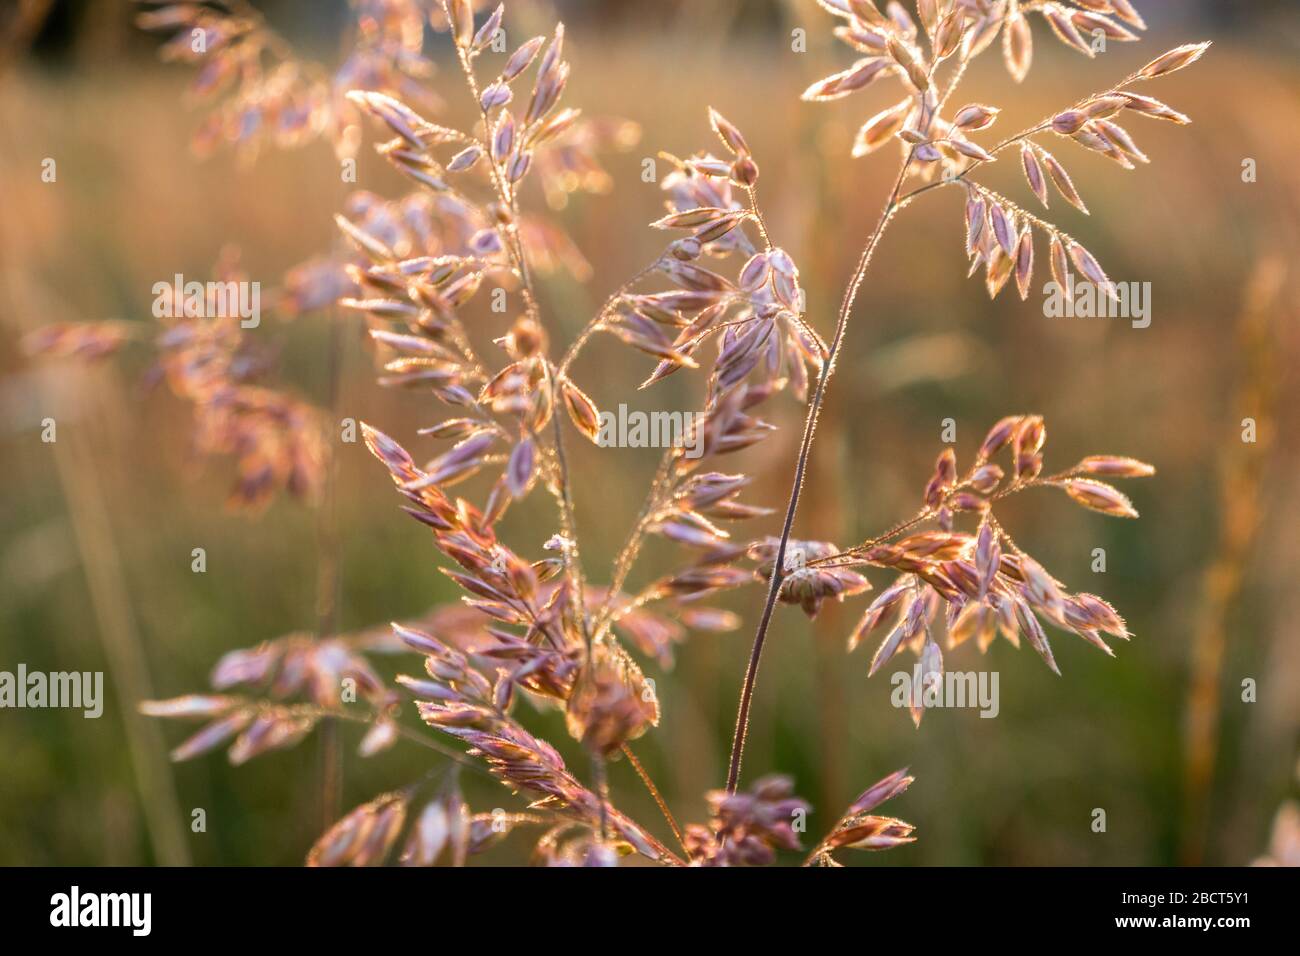 Grasses in a field meadow Stock Photo